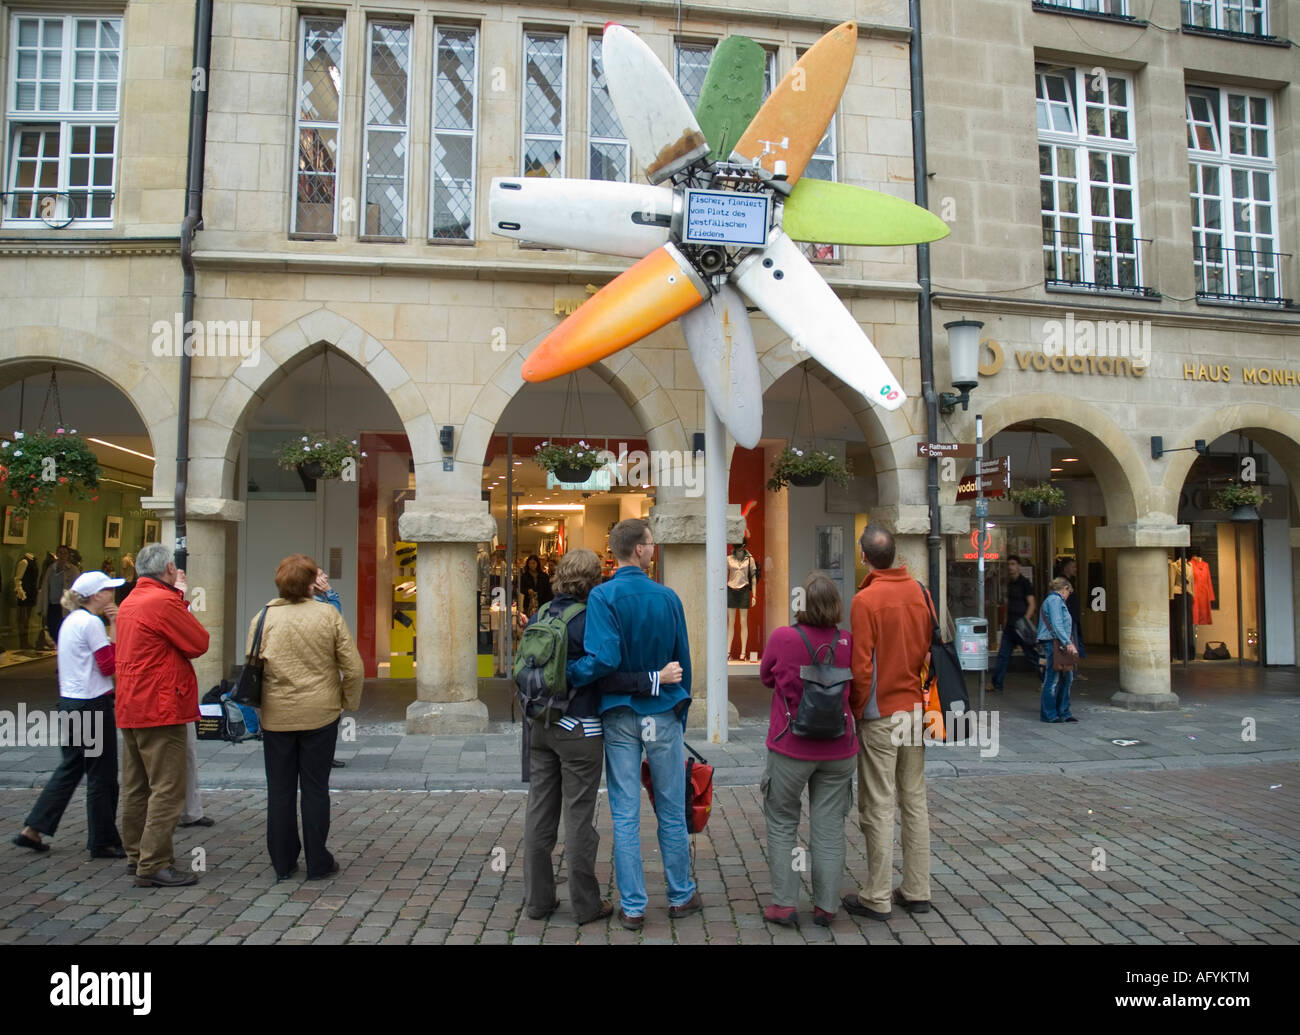 People look at a sculpture in Munster during the Sculpture show in the city Stock Photo